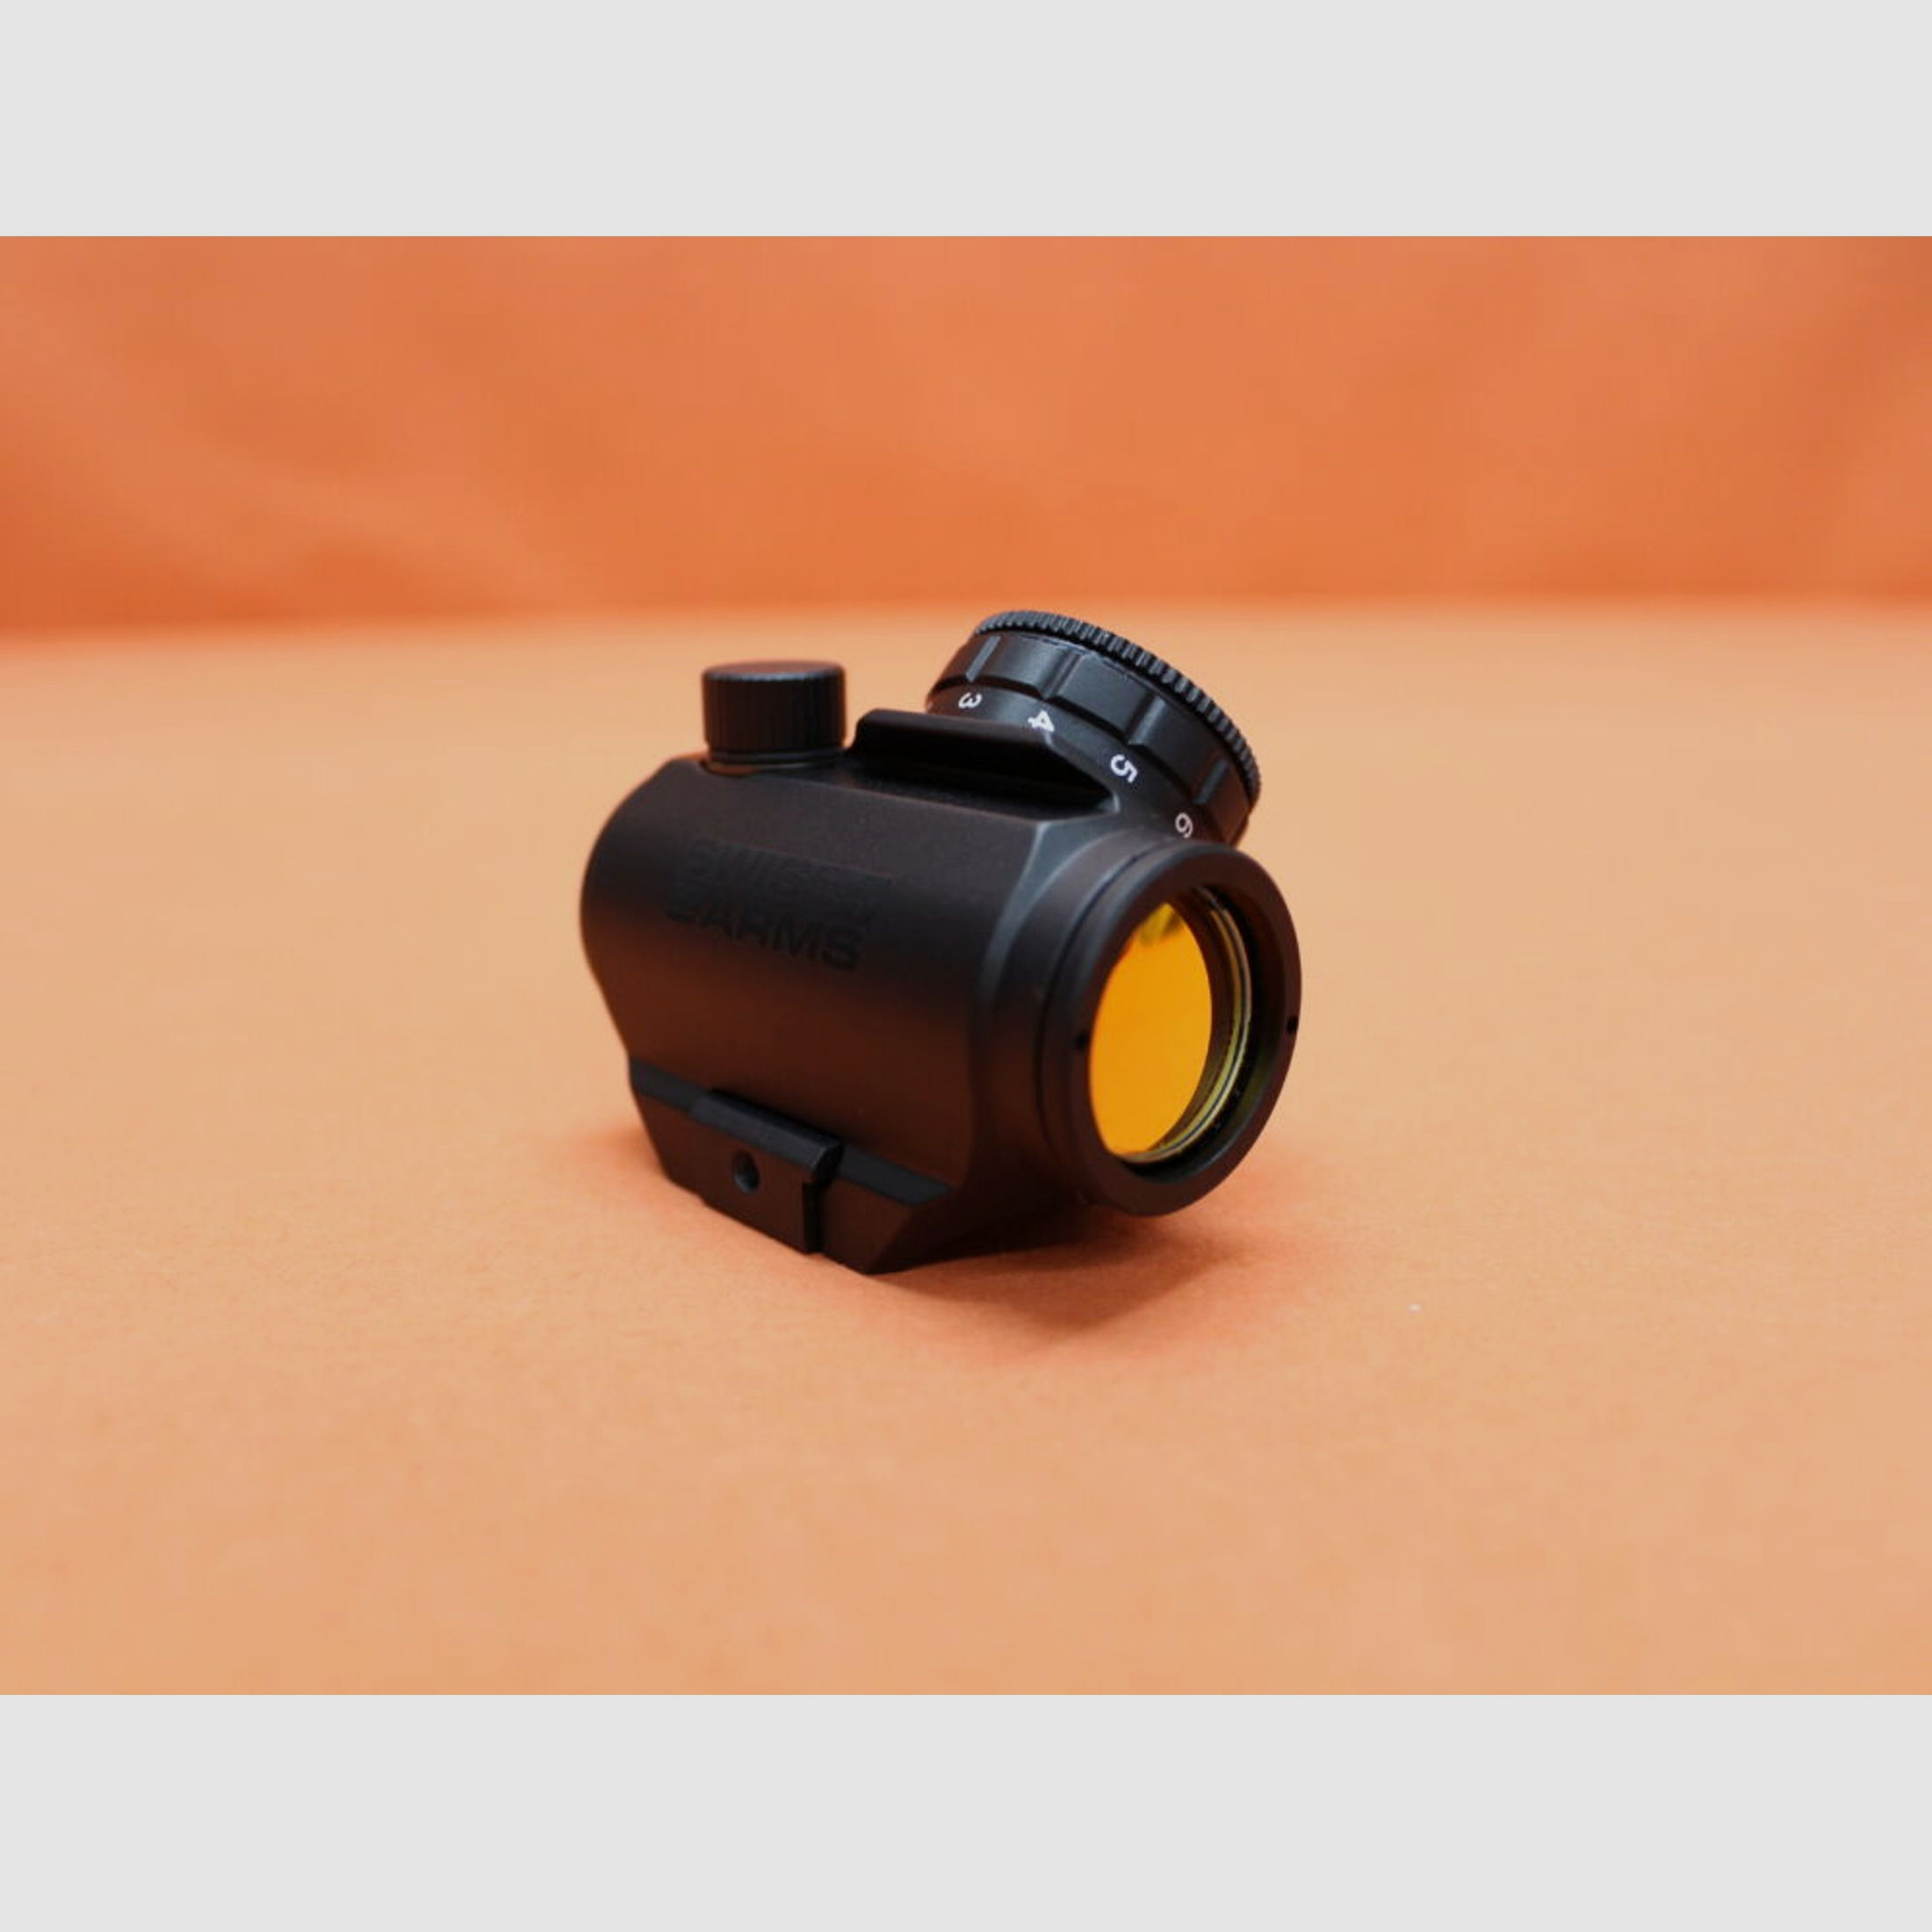 Swiss Arms	 Swiss Arms Mini Red Dot Sight Leuchtpunktvisier mit Montage f. Weaver-/ Picatinnyprofil